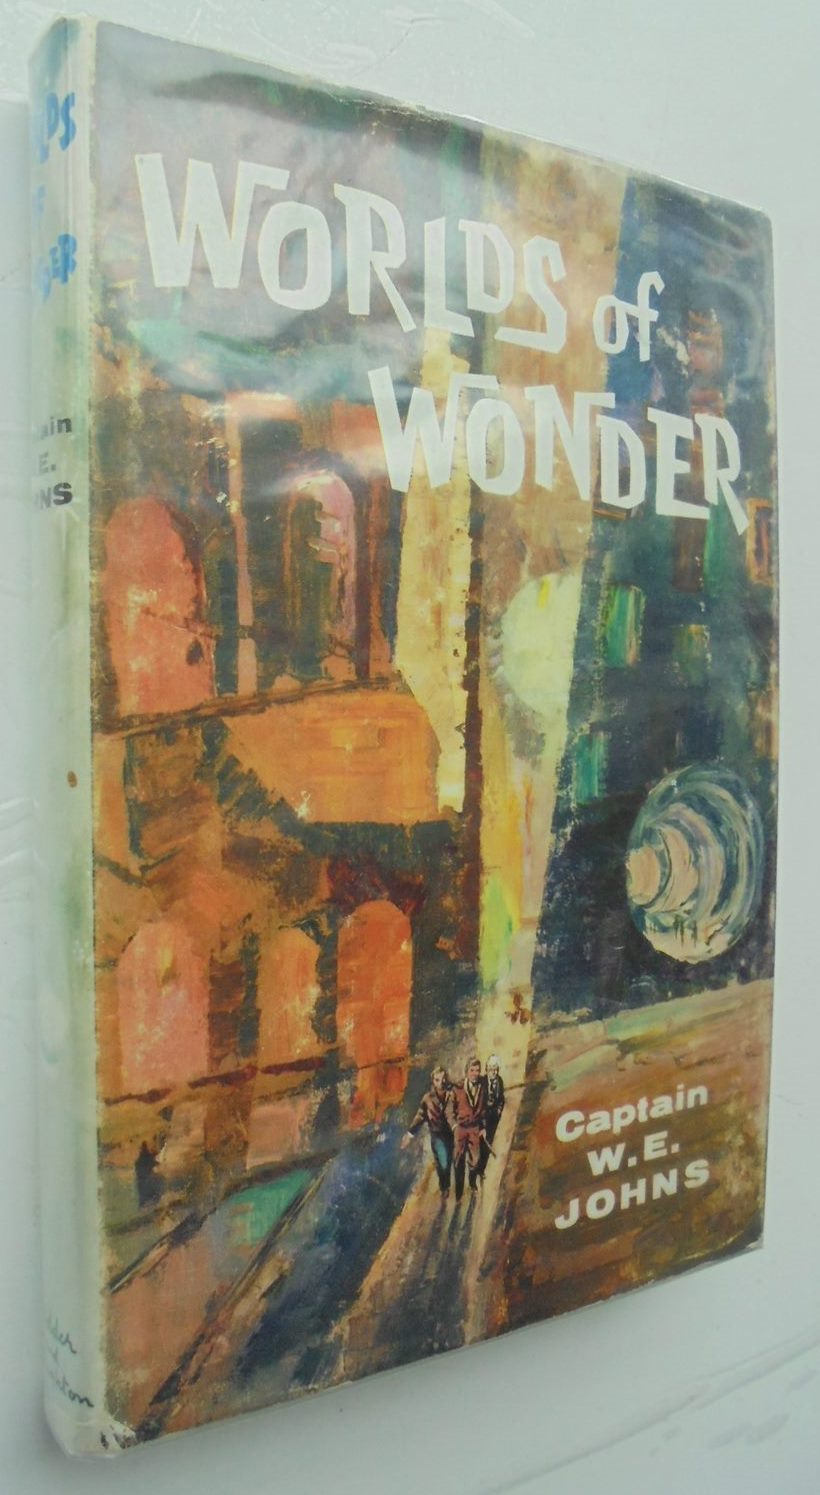 Worlds of Wonder. More Adventures in Space By Captain W. E. Johns.